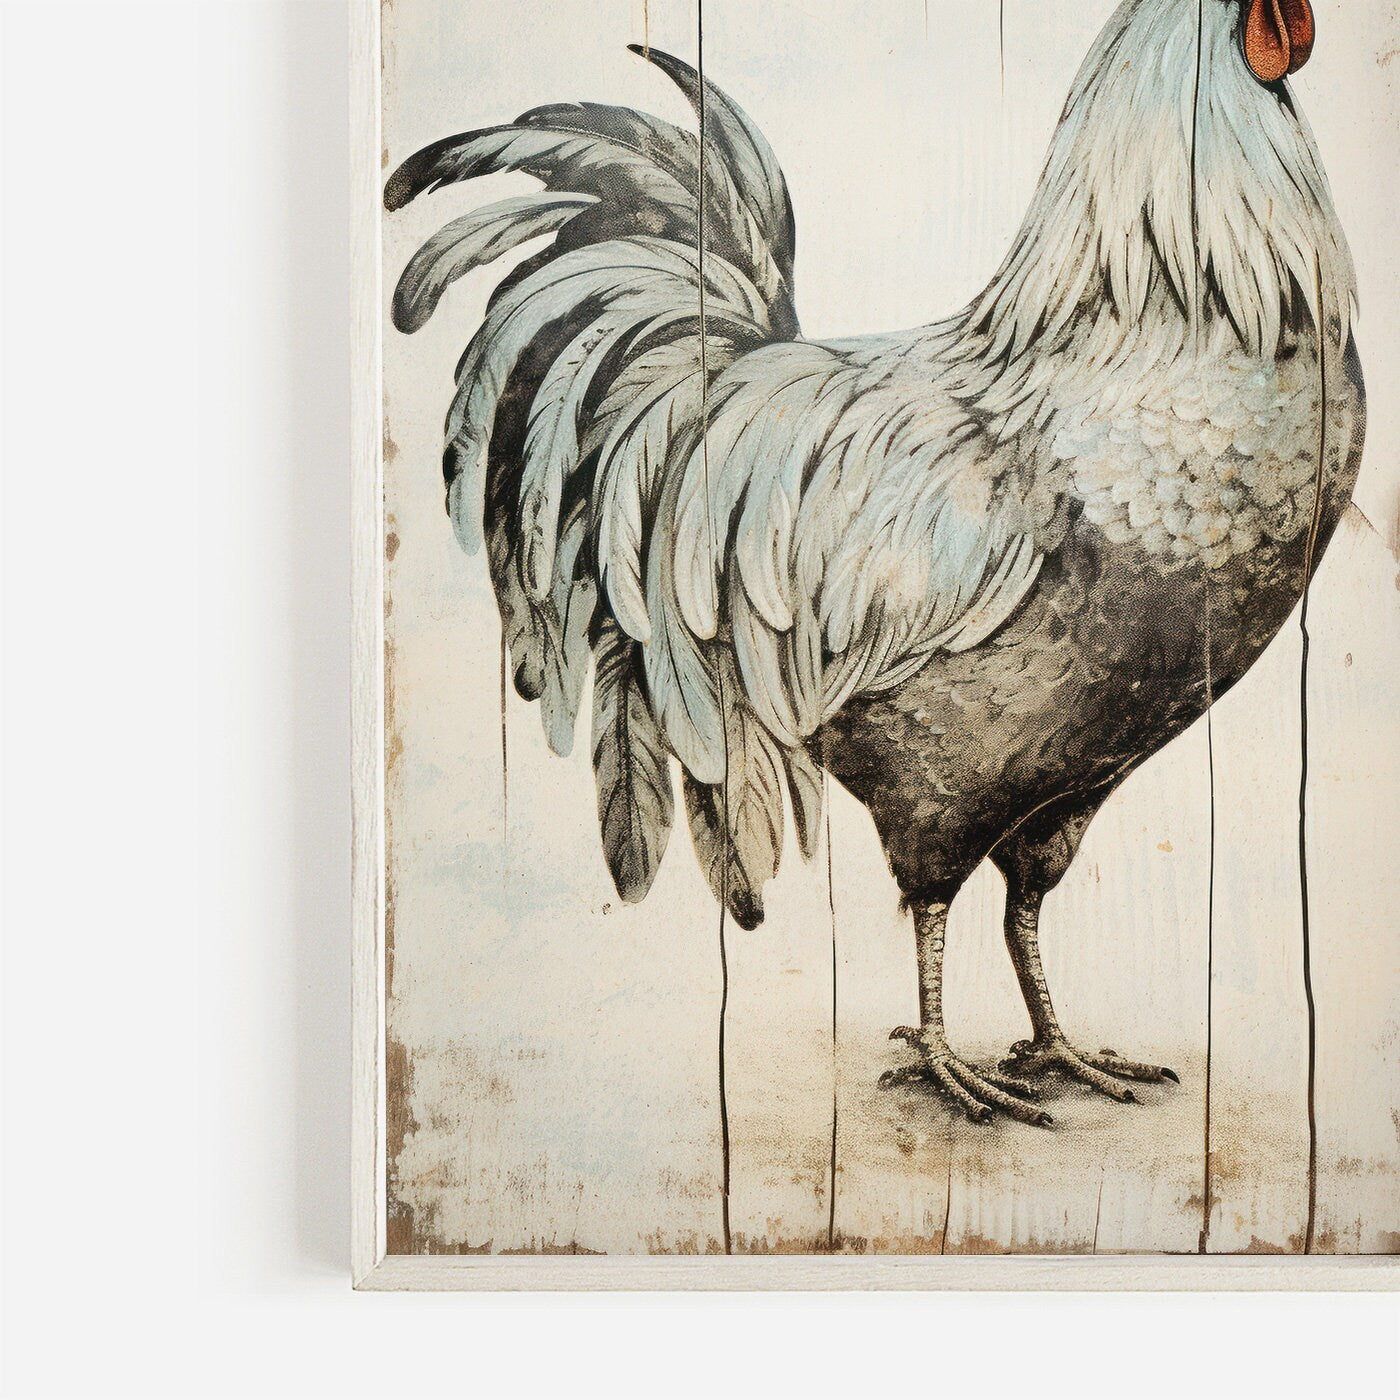 Vintage Rooster Print, Cock Wall Art, Rustic Farmhouse Decor, Poultry Print, Farm Animal Painting, Chicken Print, Printable Homestead Art